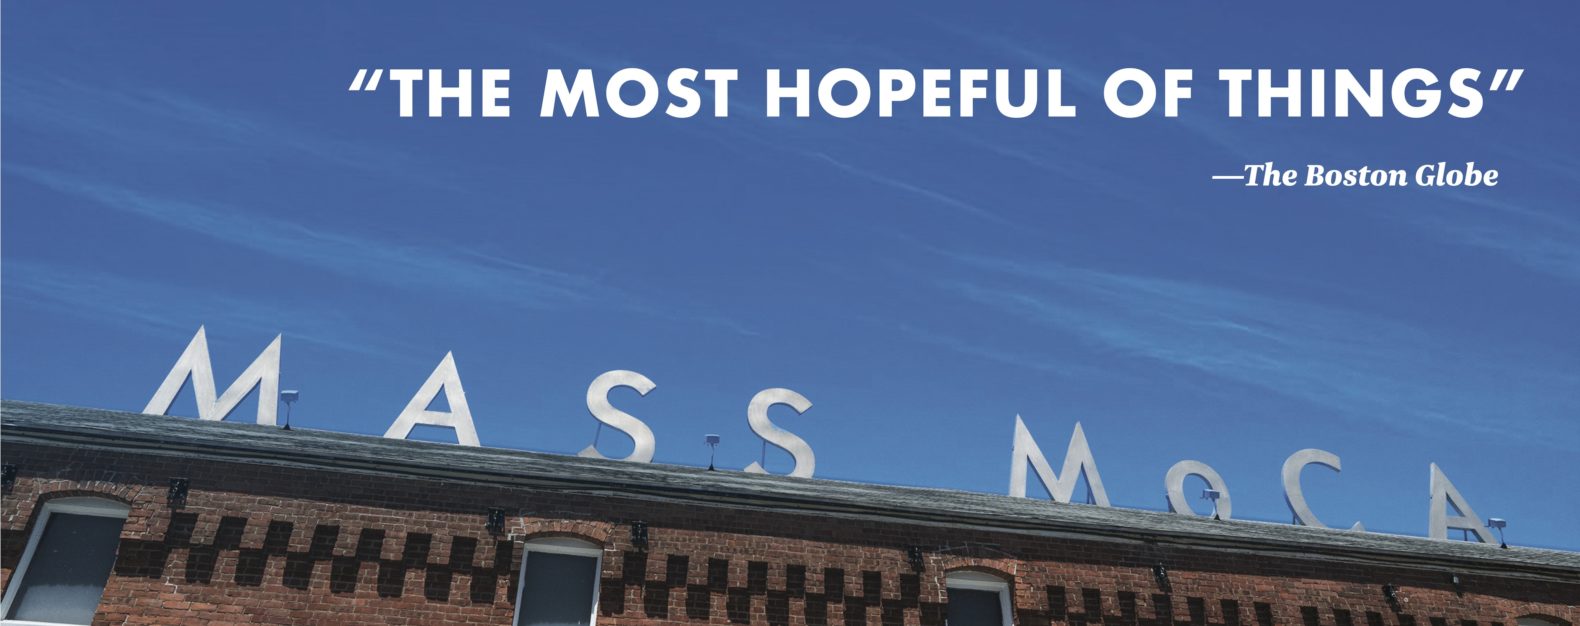 Angled up view of brick building with MASS MoCA sign and blue sky above, with text overlaid reading "The most hopeful of things"